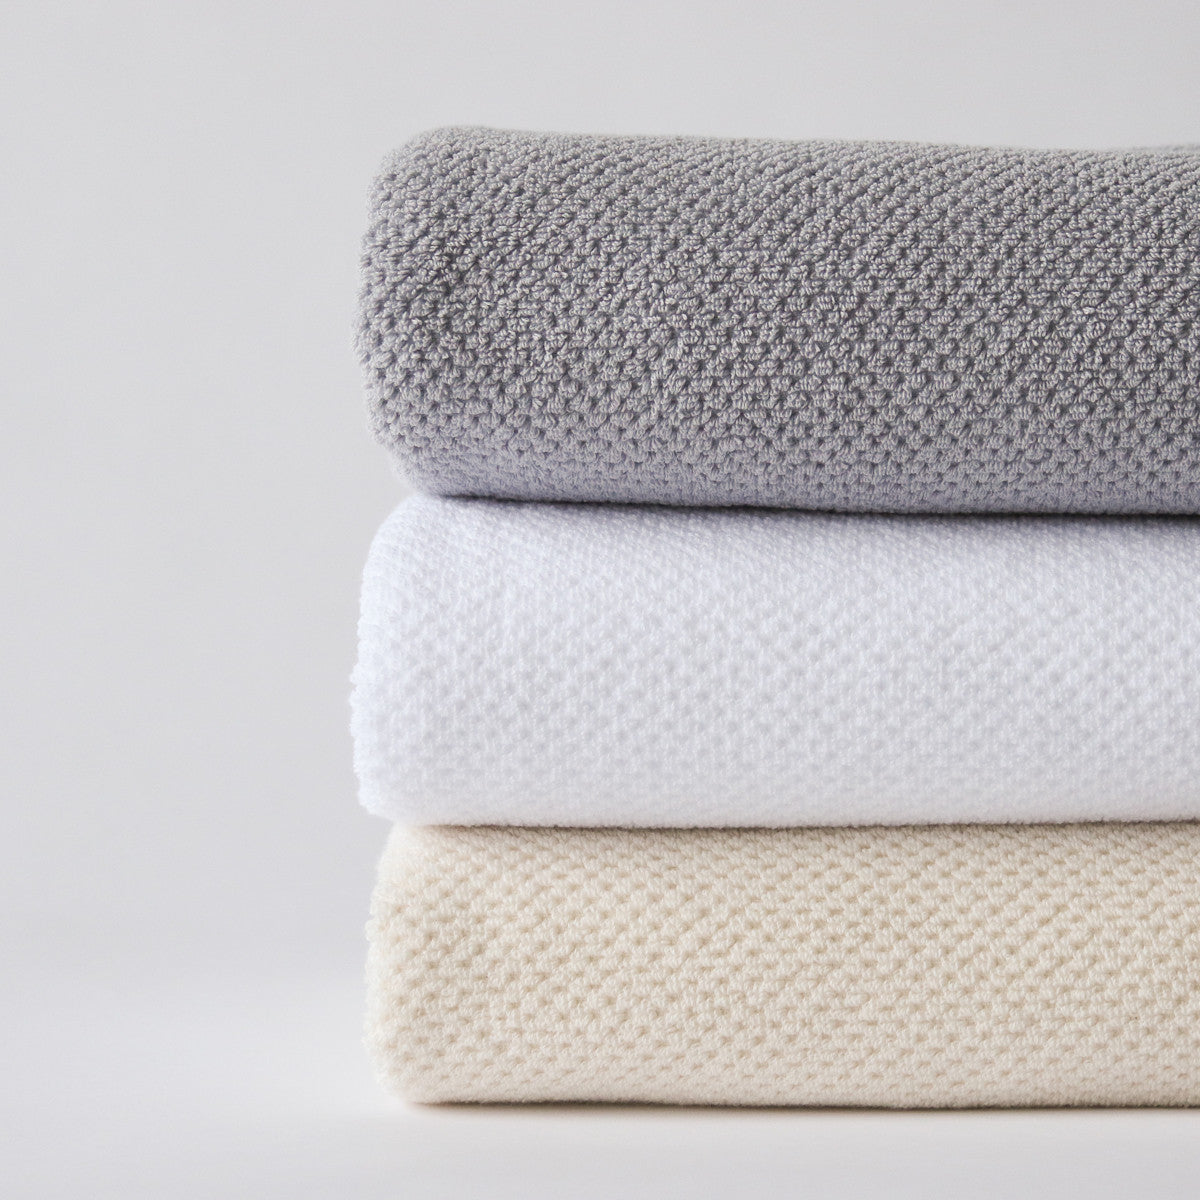 Freshen up Your Bath Linen with Crisp New white wash cloth